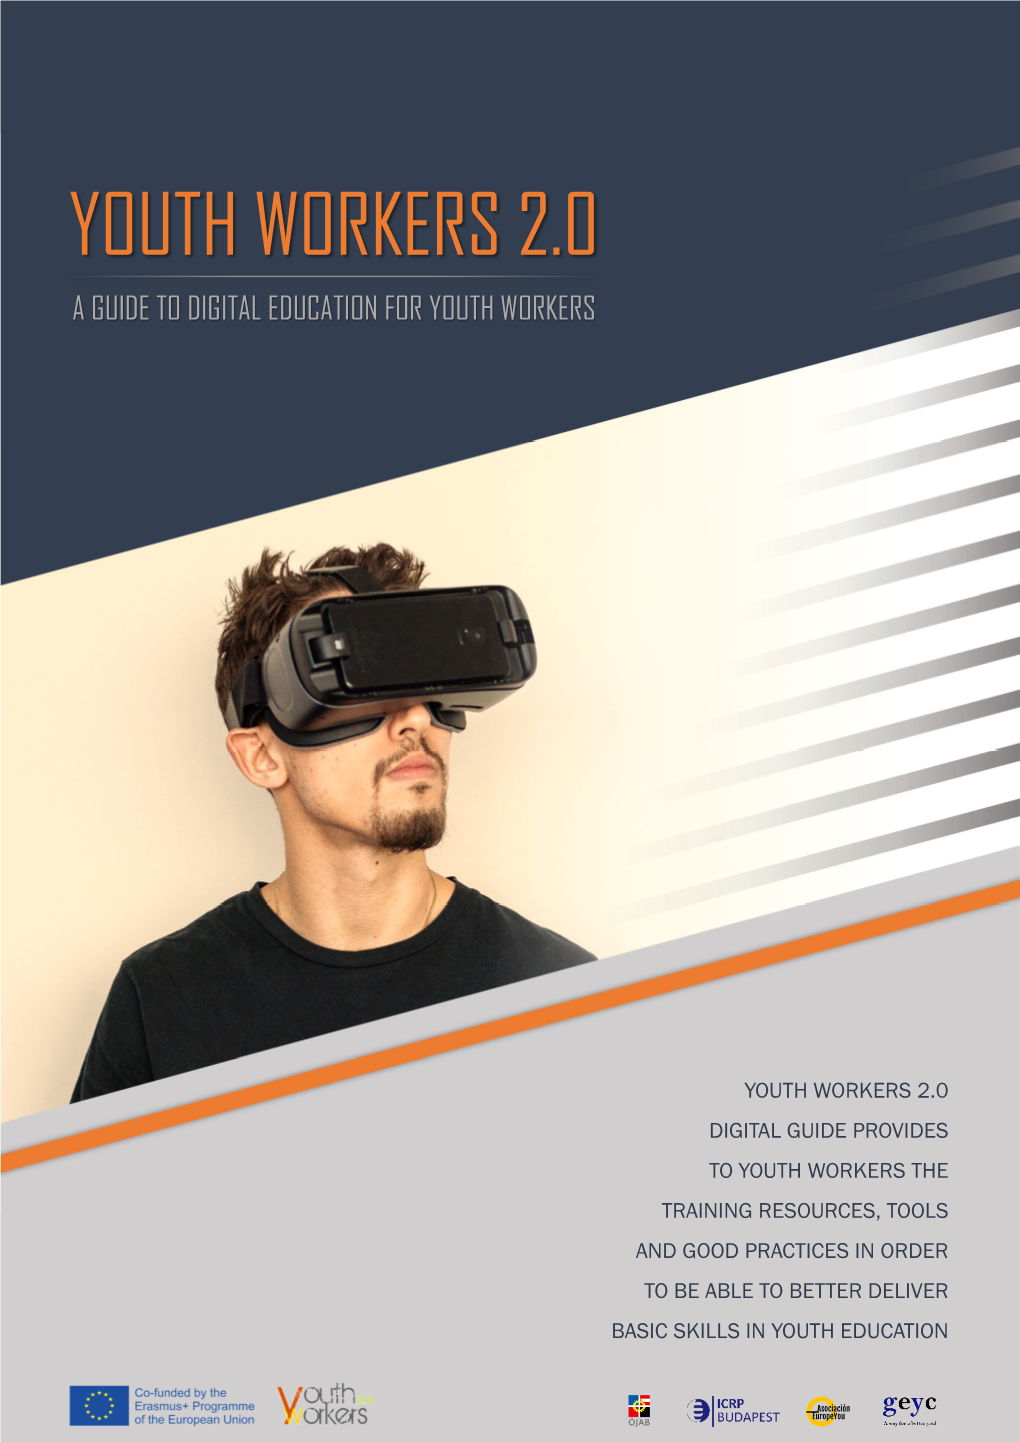 A Guide to Digital Education for Youth Workers